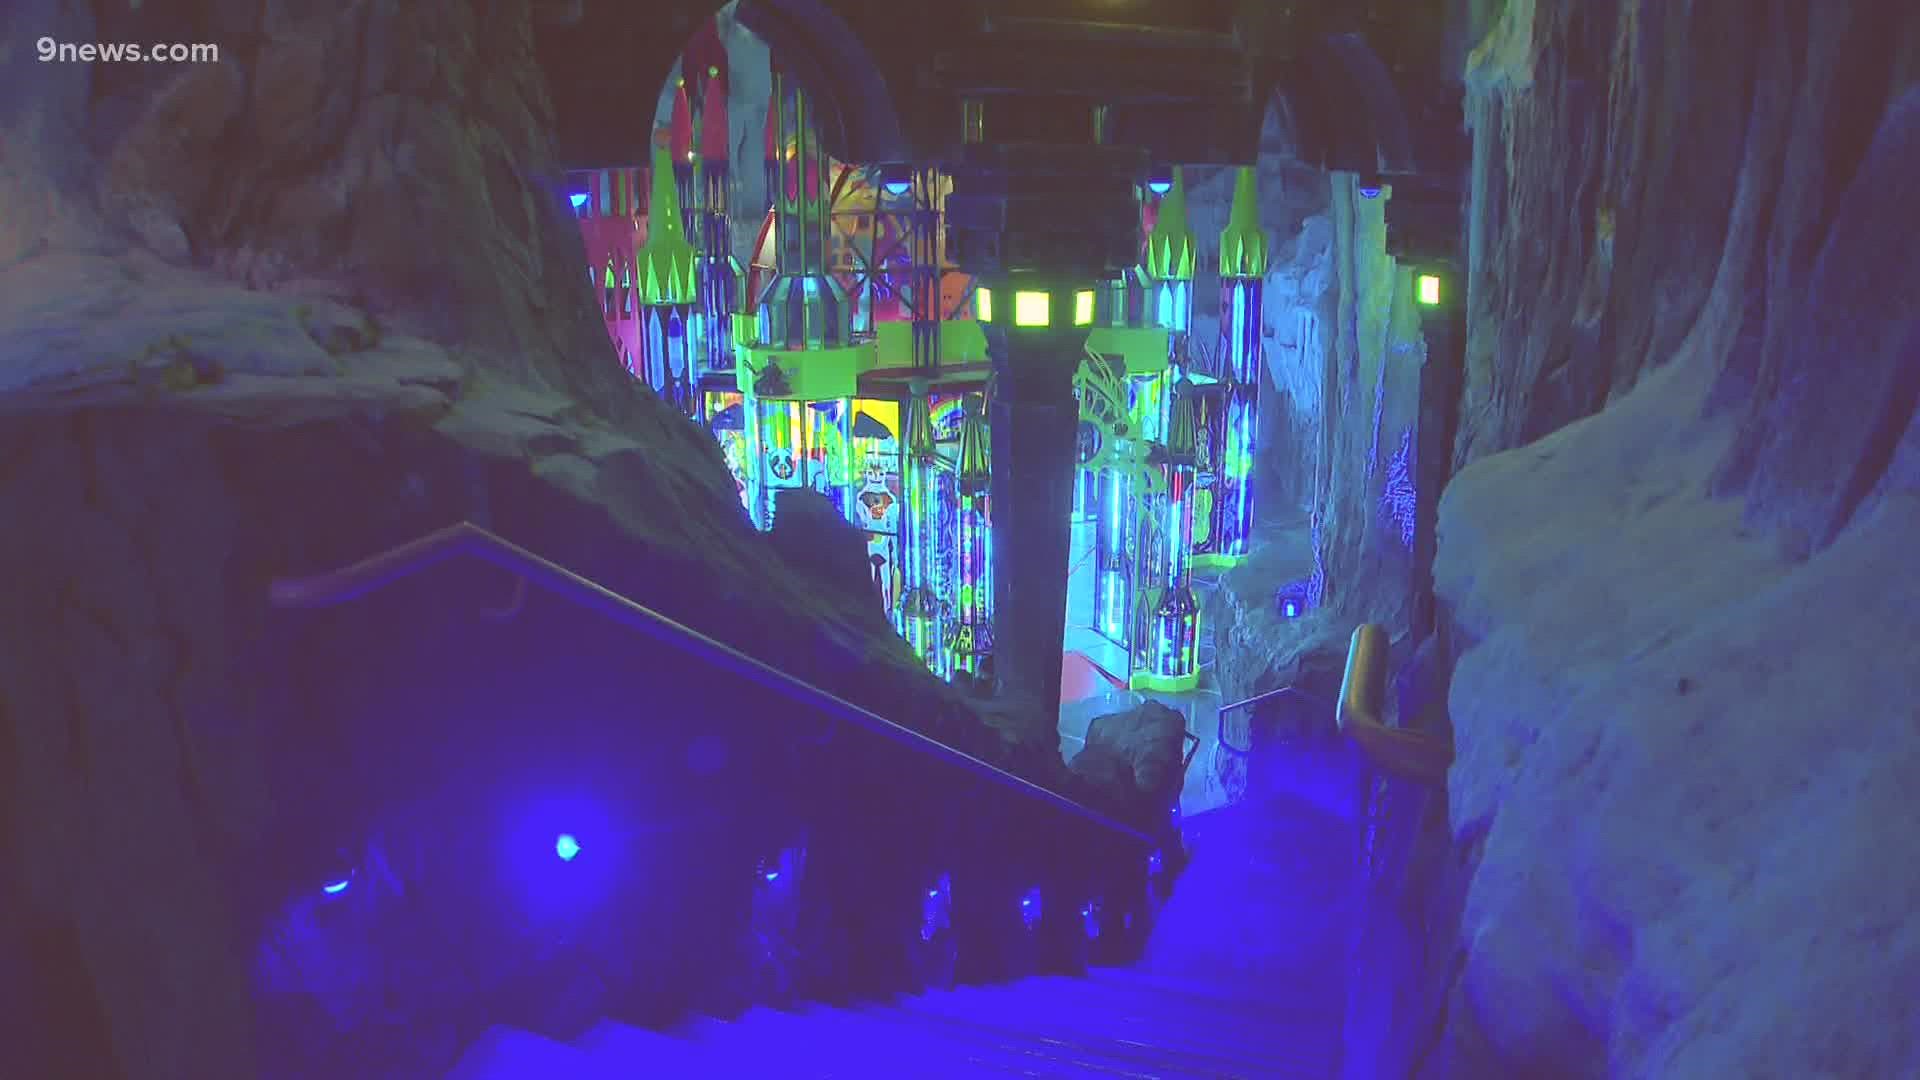 Jon Glasgow gives us a preview of what is inside Denver's Meow Wolf.